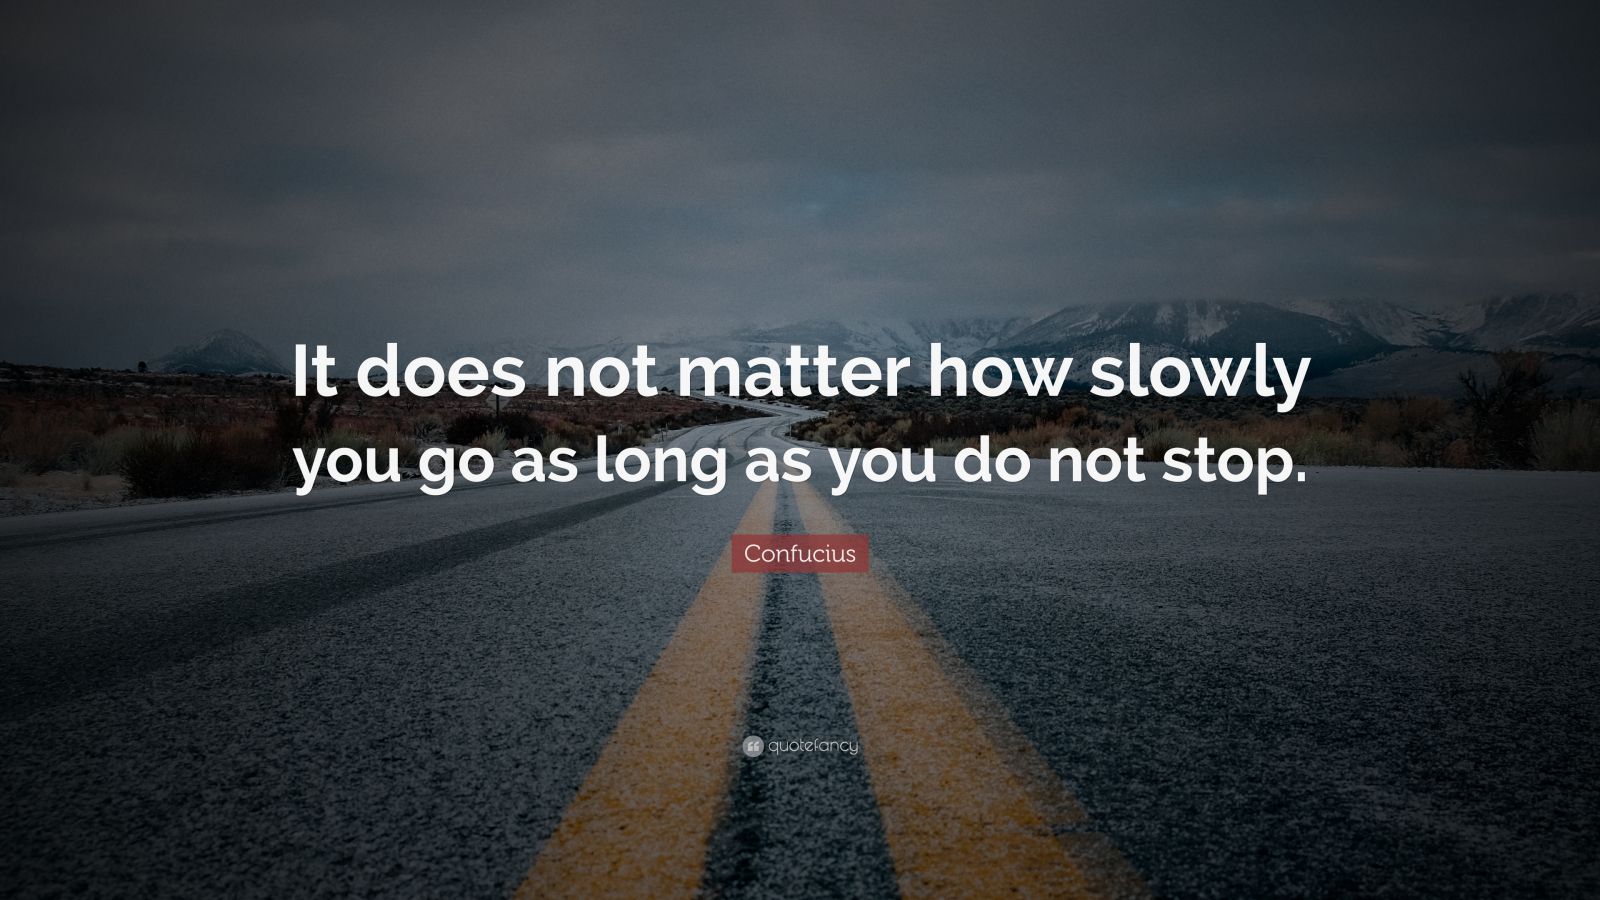 Confucius Quote “It does not matter how slowly you go as